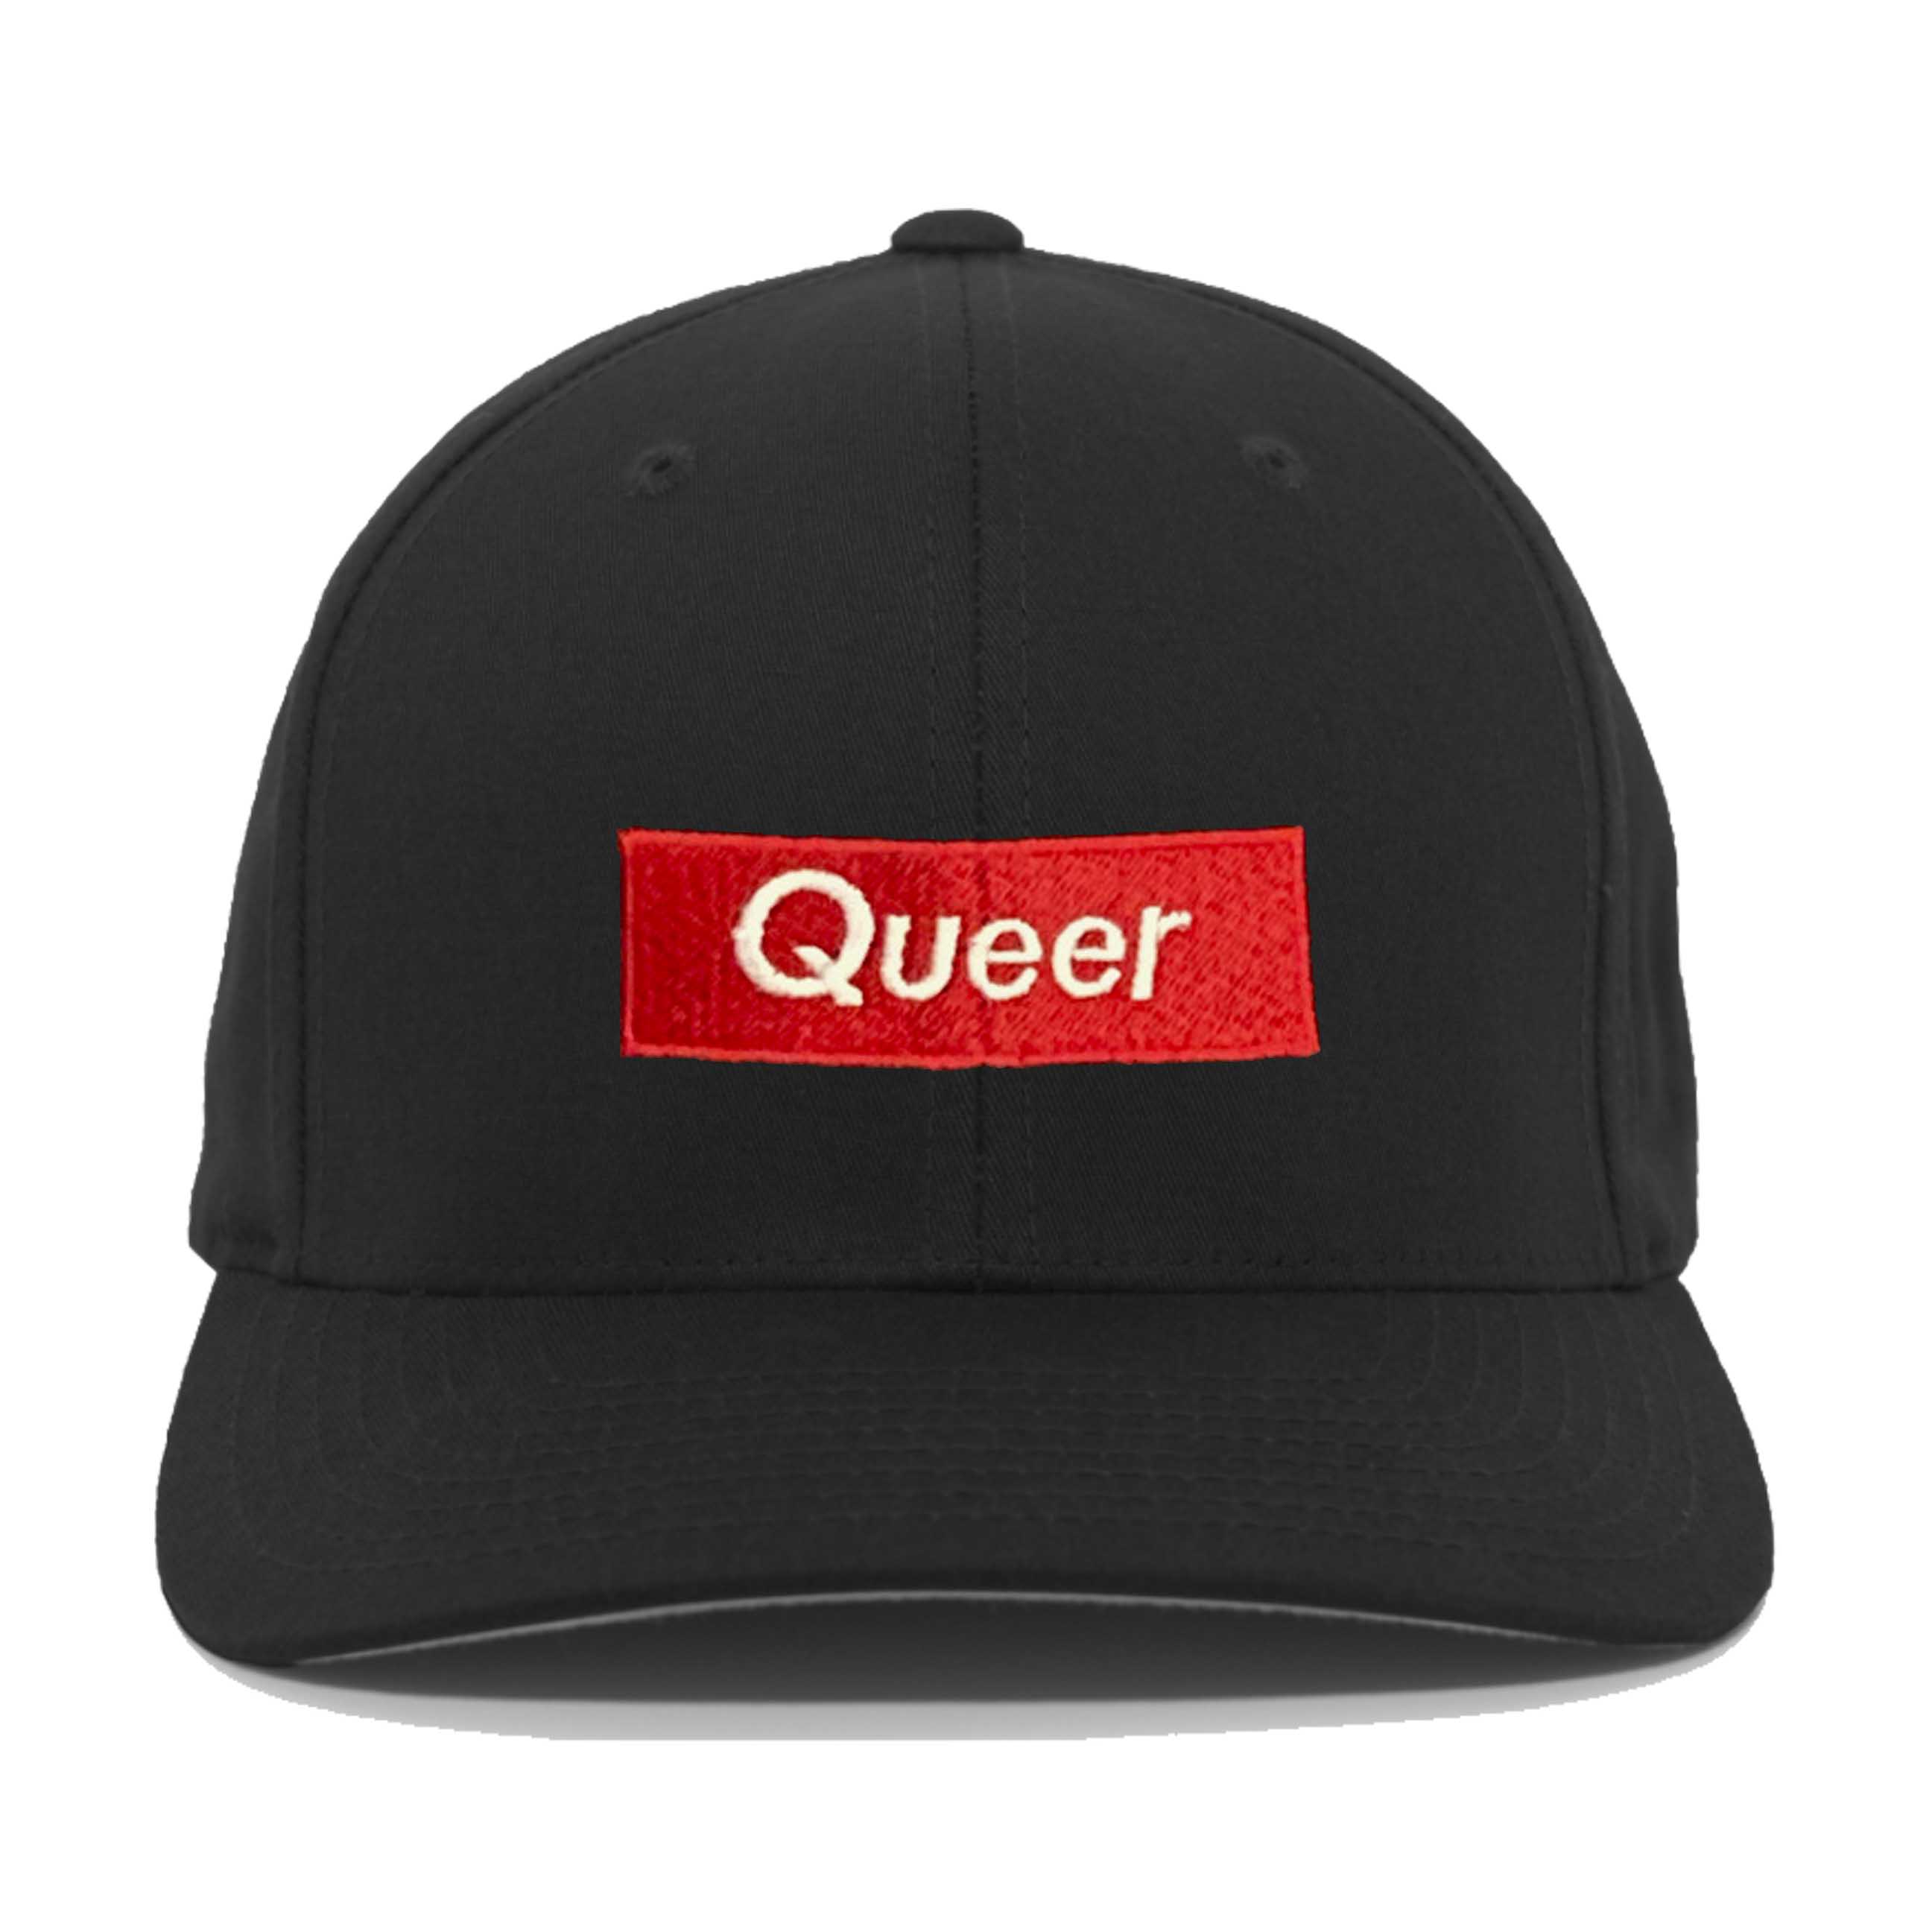 queer red rectangle black flexfit twill baseball hat